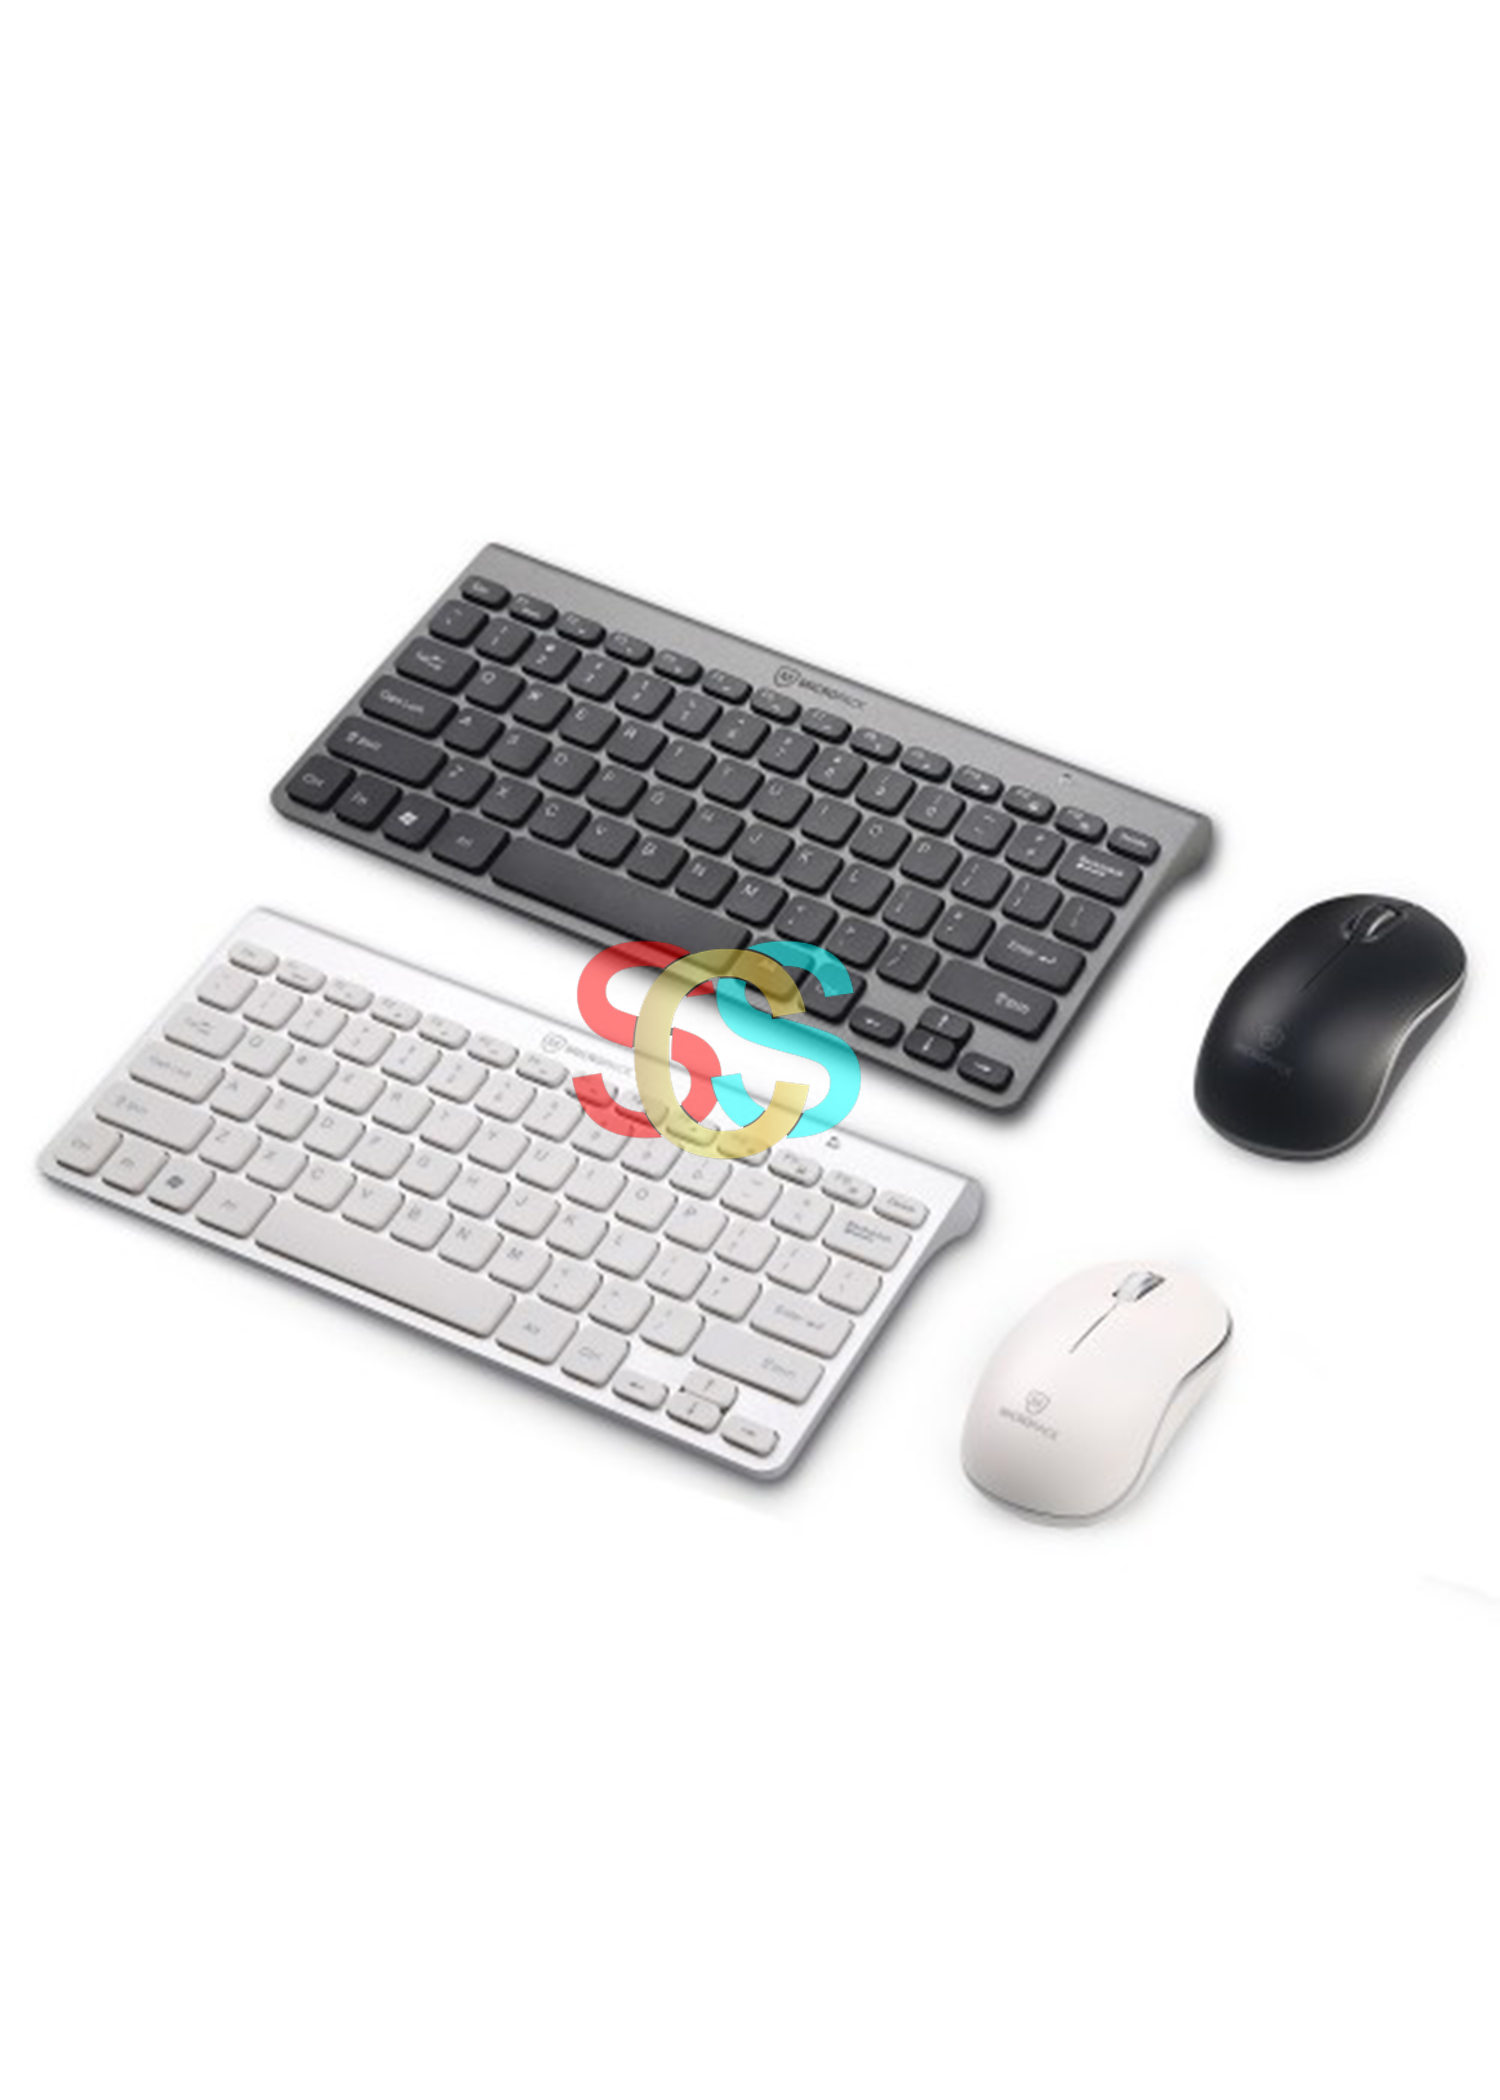 Micropack KM-218W Keyboard and Mouse